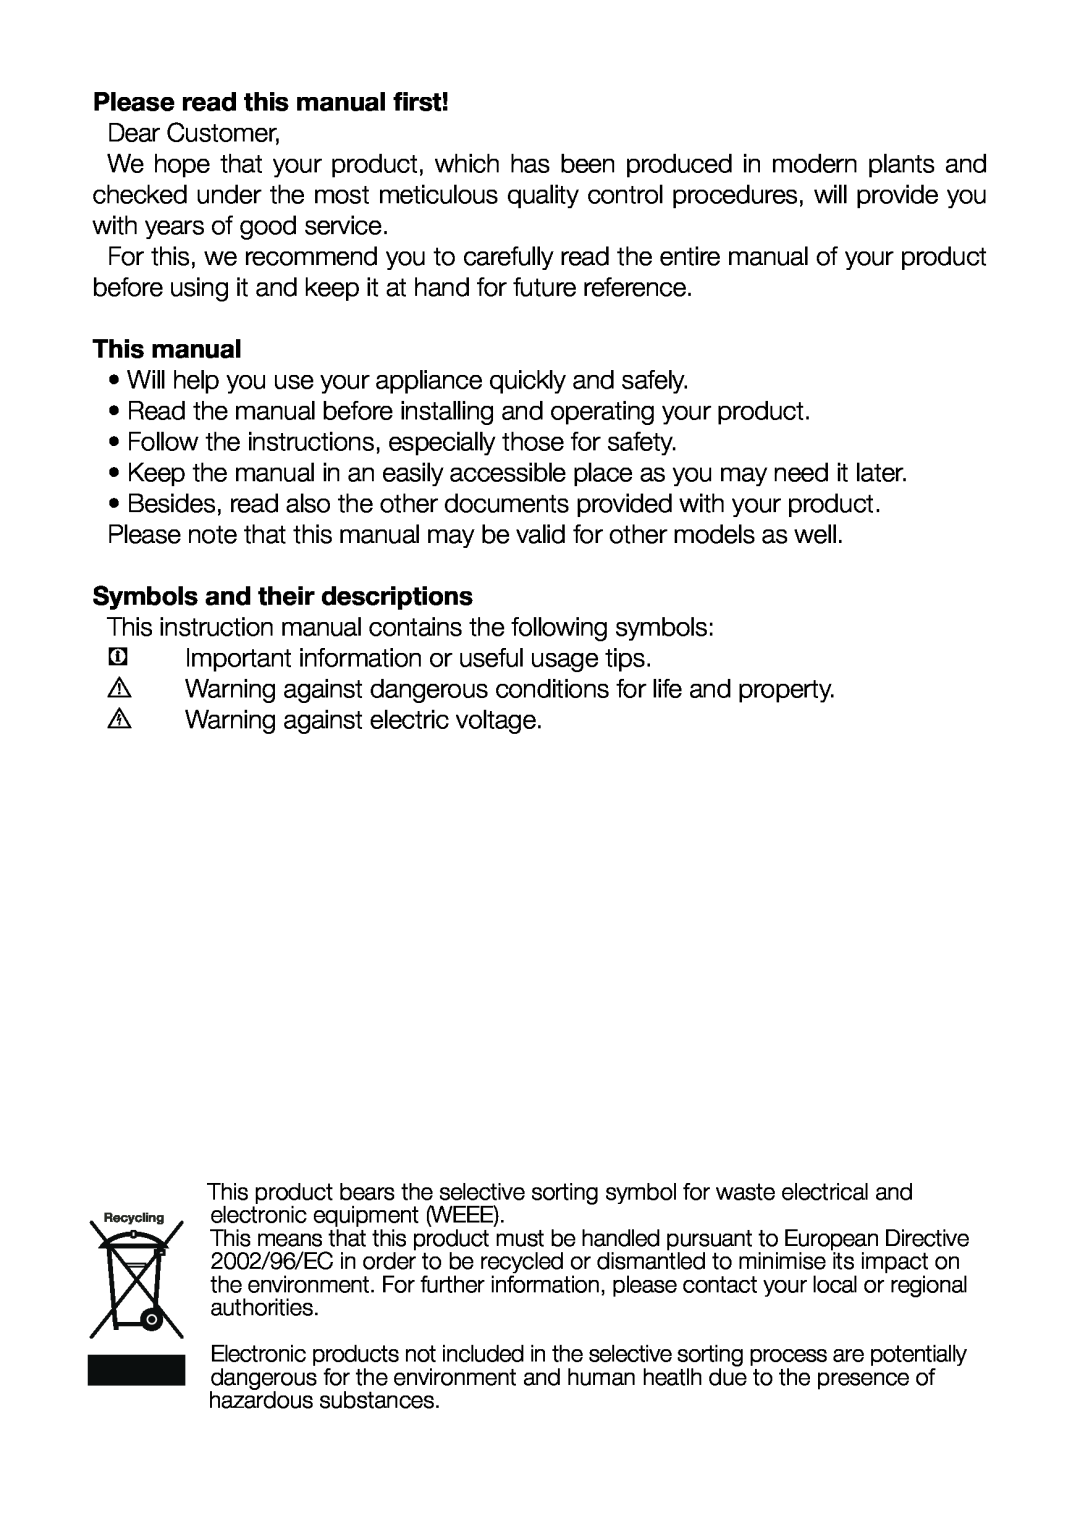 Beko CT7831S Please read this manual first, This manual, Symbols and their descriptions 